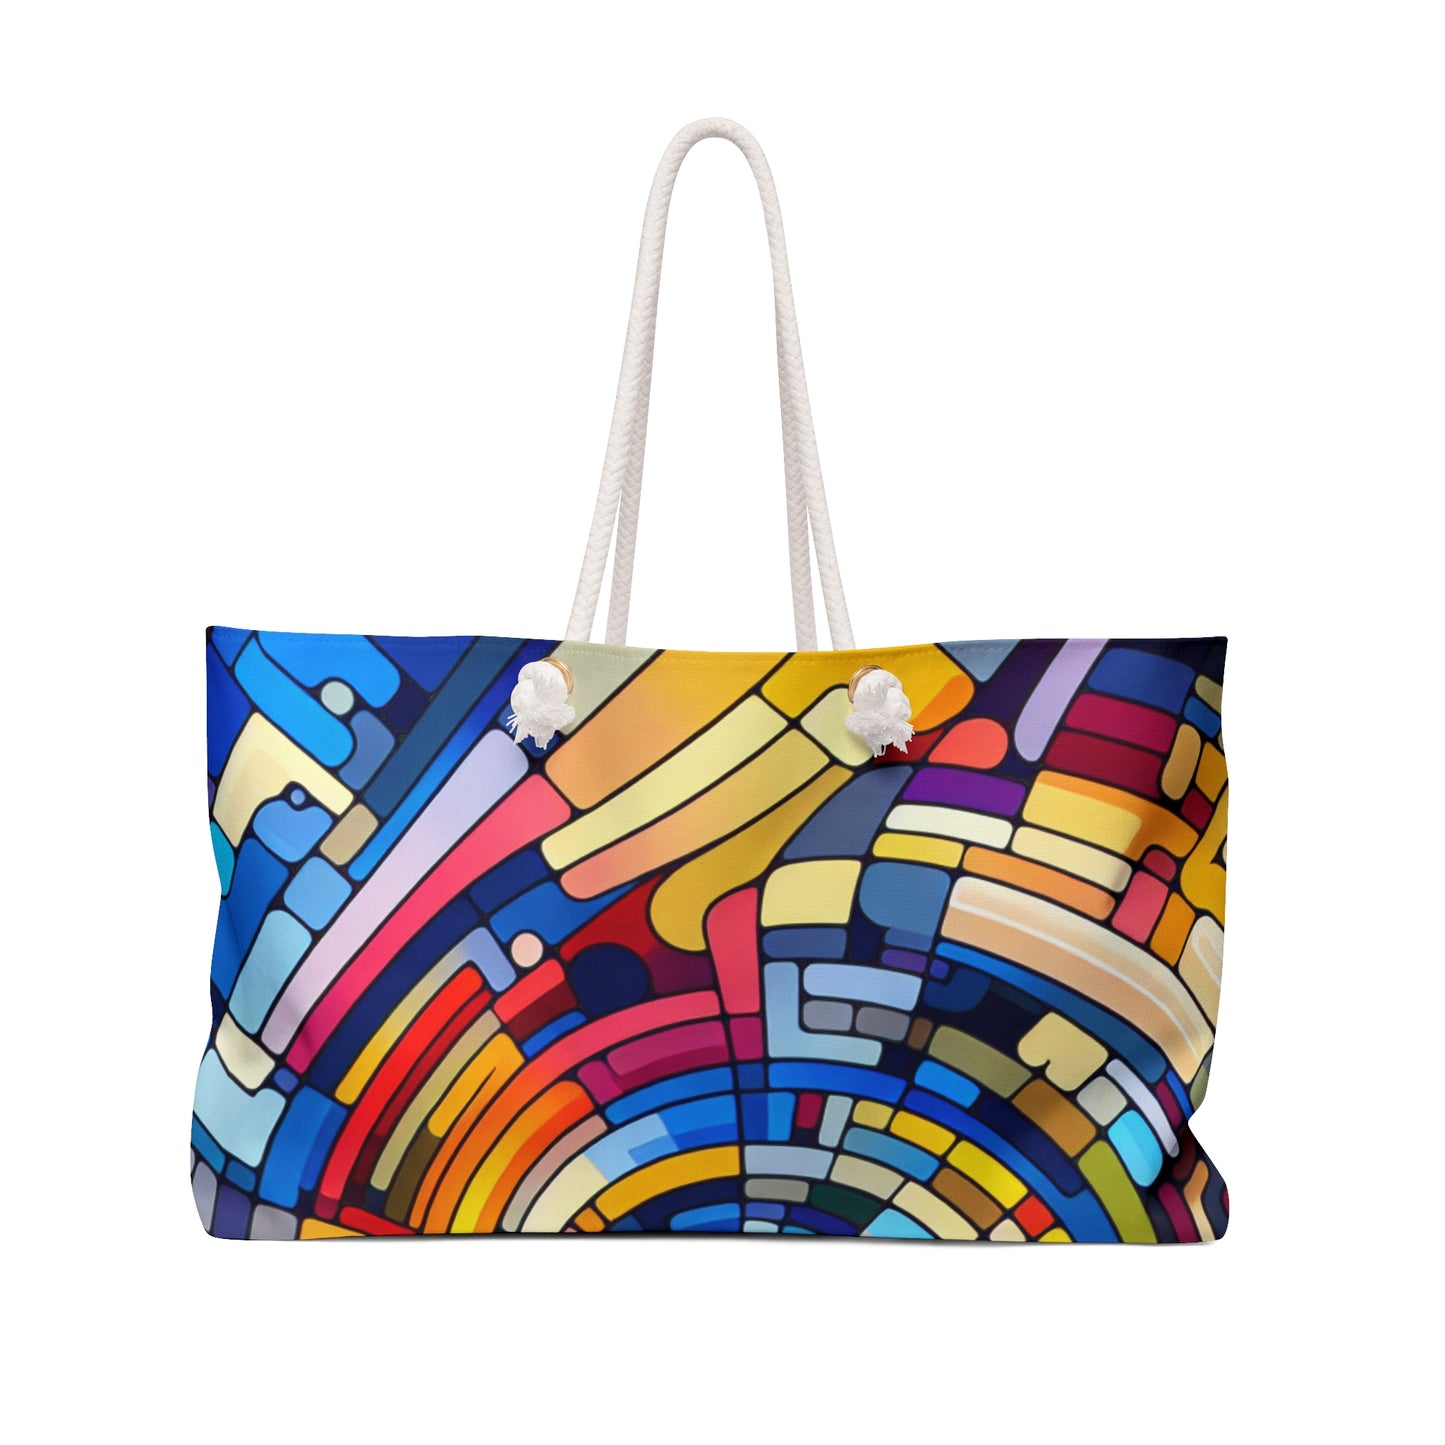 "Endless Possibilities" - The Alien Weekender Bag Abstract Art Style